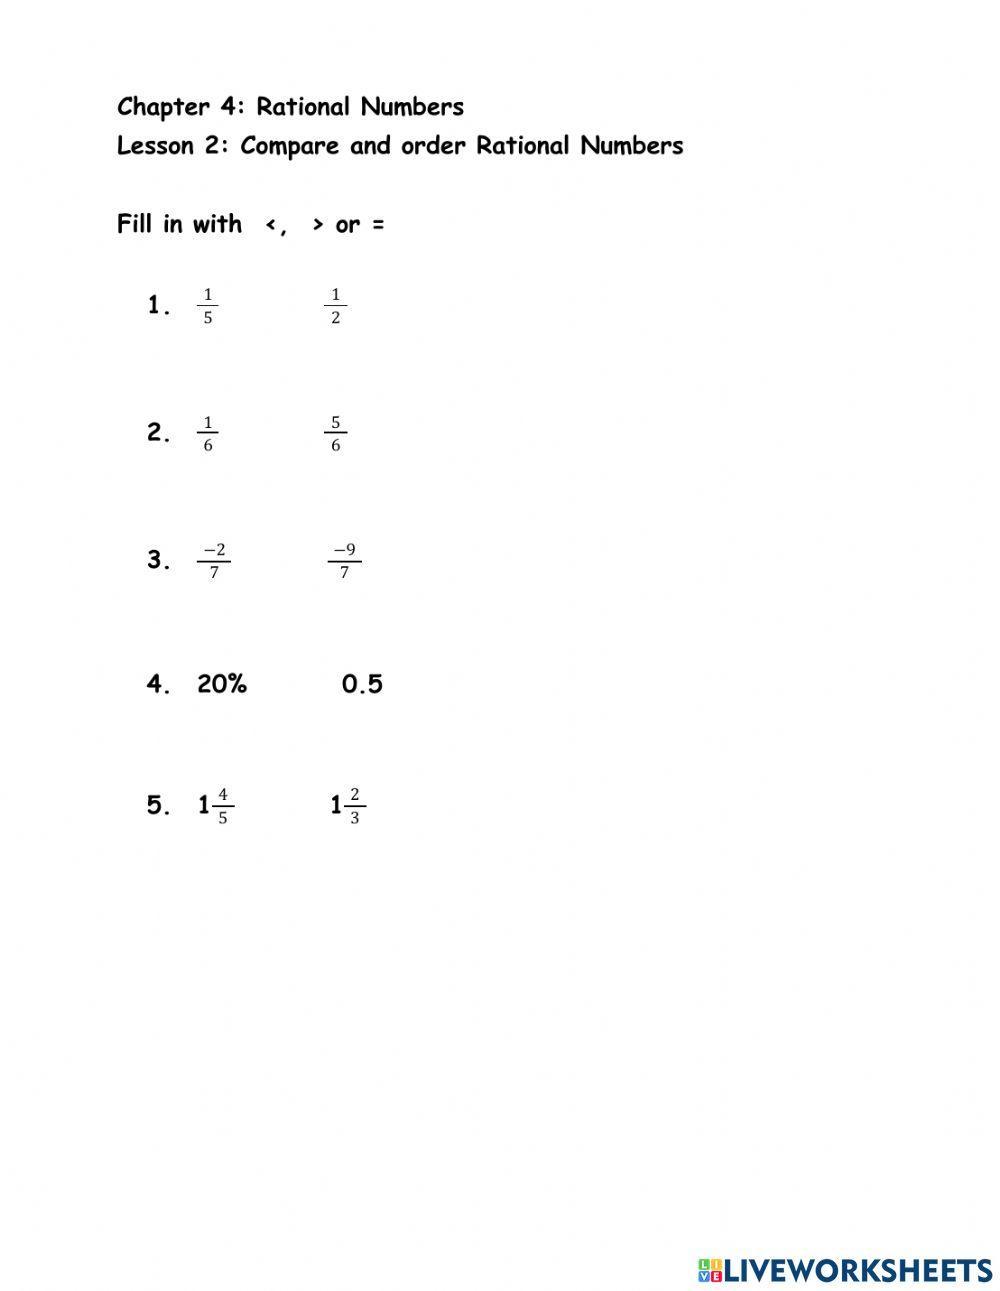 Compare and Order Rational Numbers